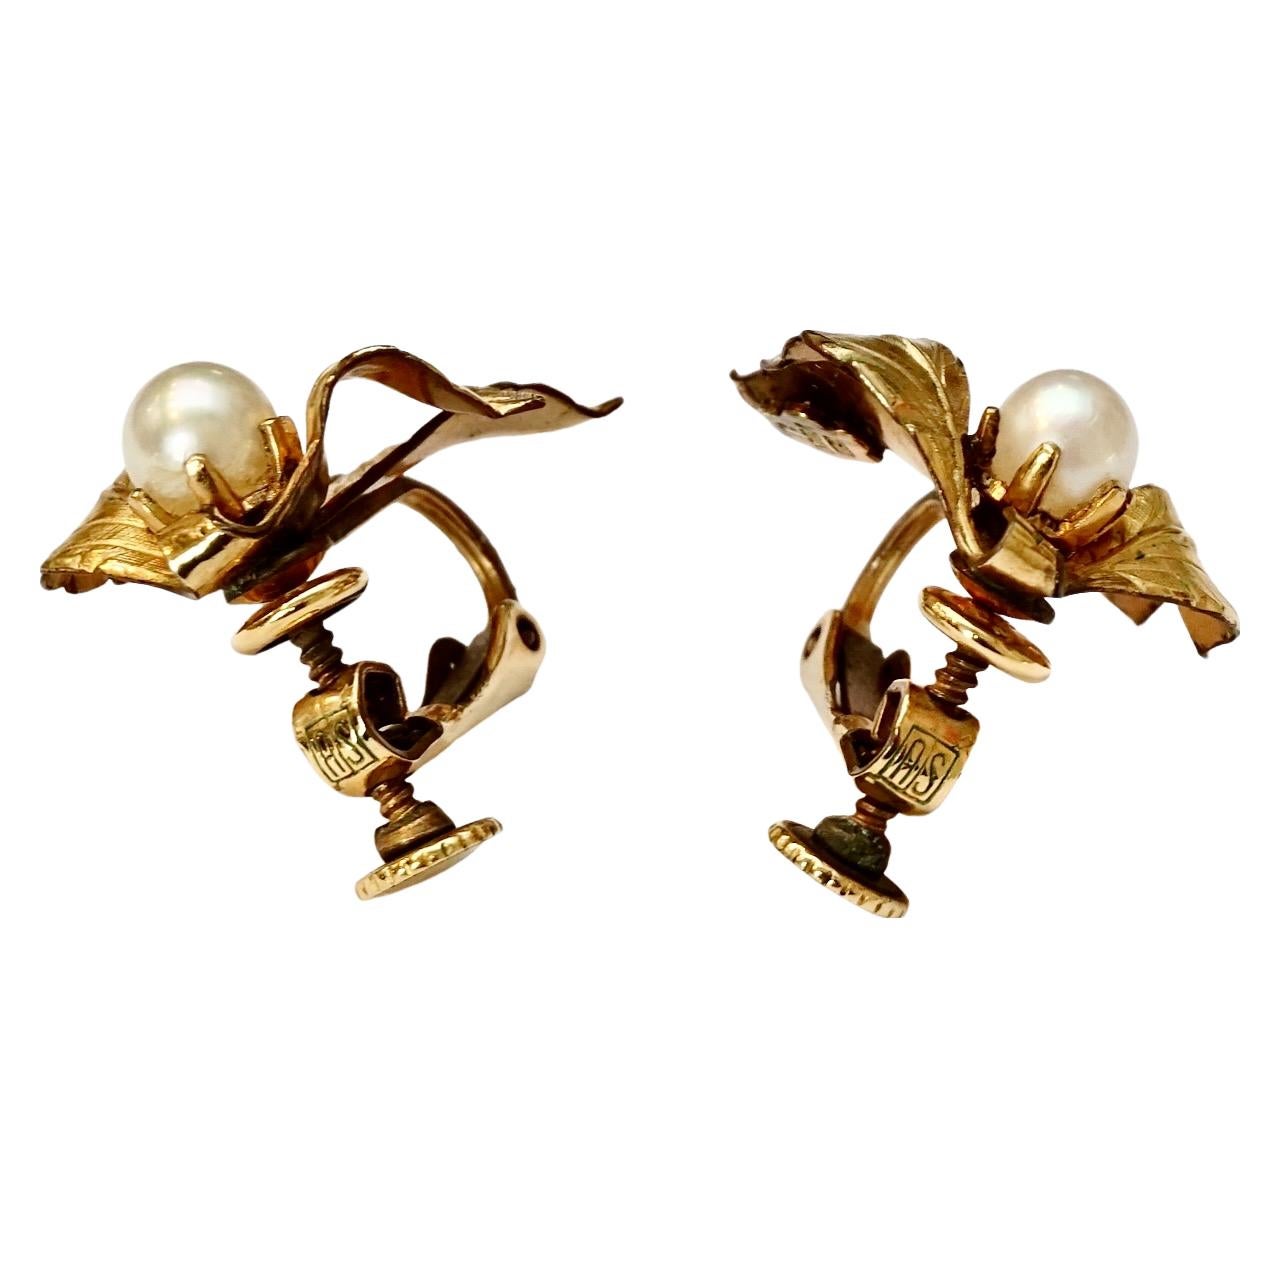 Lovely 1/20 12K gold filled screw back earrings, featuring a leaf design with cultured pearls. Measuring length 1.8 cm / .7 inch by width 1.9 cm / .74 inch, and the pearls are 5 mm.

This is an elegant pair of gold filled and cultured pearl earrings.